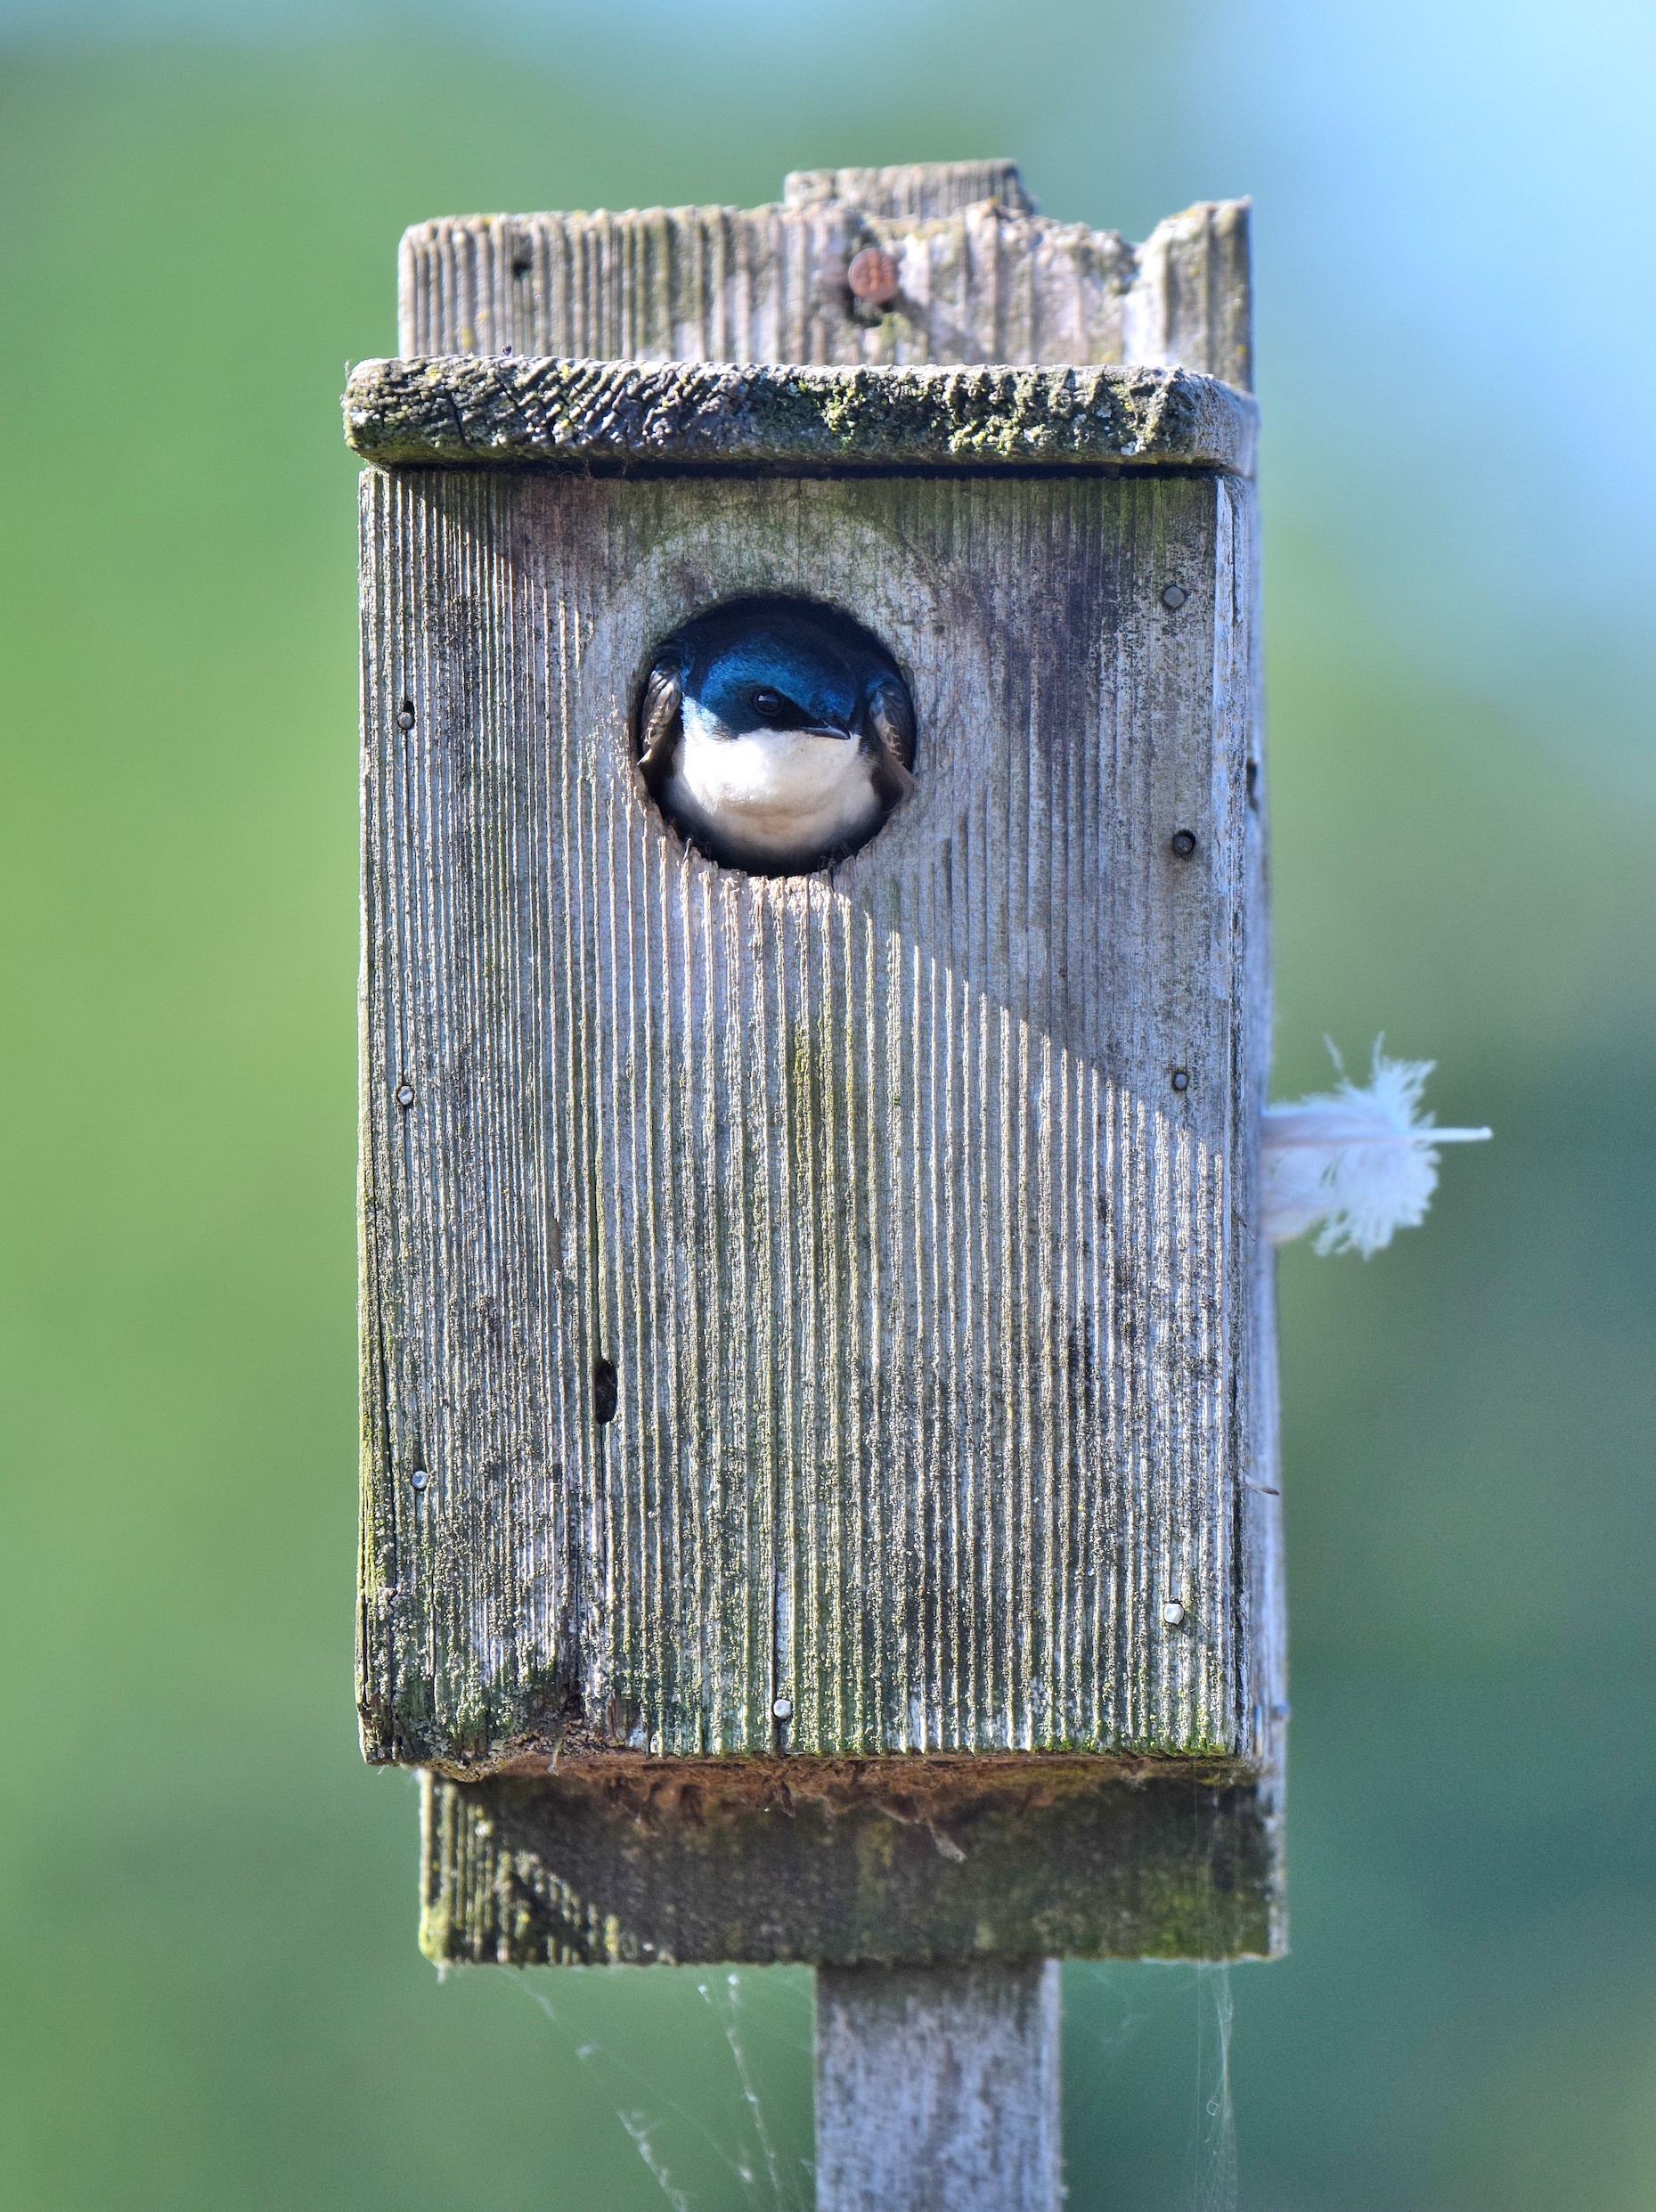 Farmers may be able to promote insect-eating species like this tree swallow by installing nest boxes without increasing food safety risks. (Daniel Karp, UC Davis)